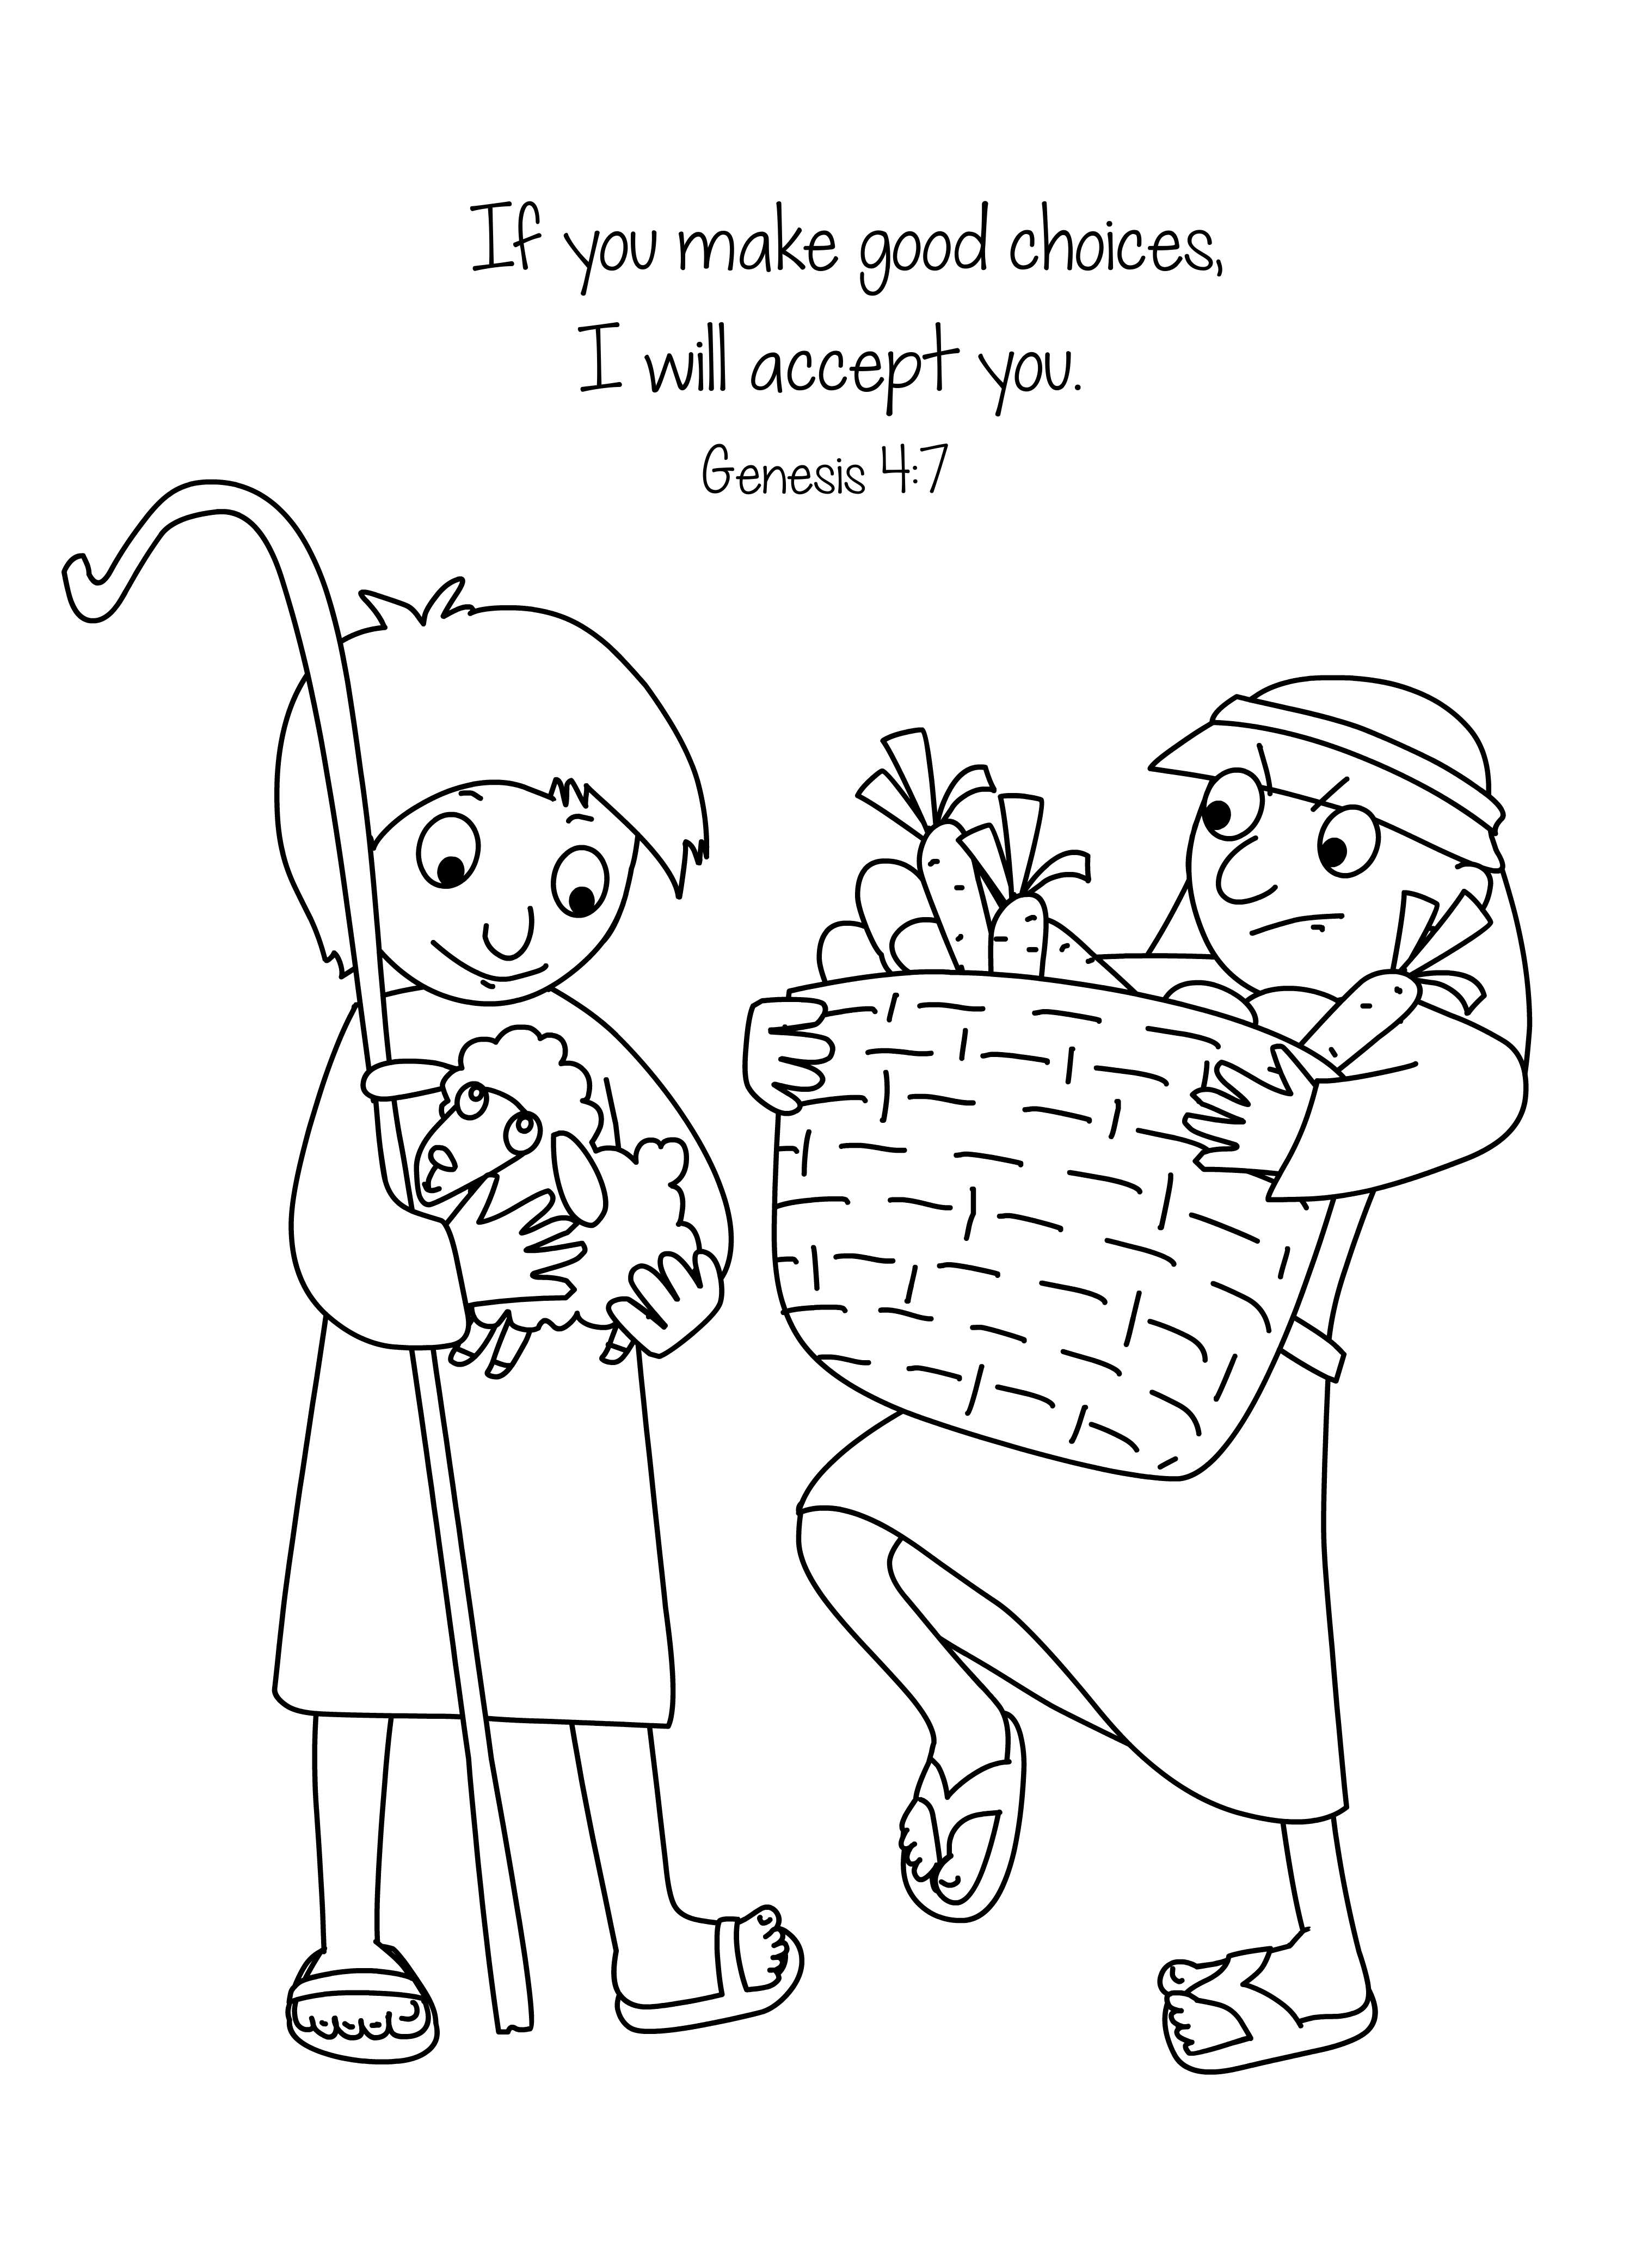 Cain And Abel Coloring Page at Free printable